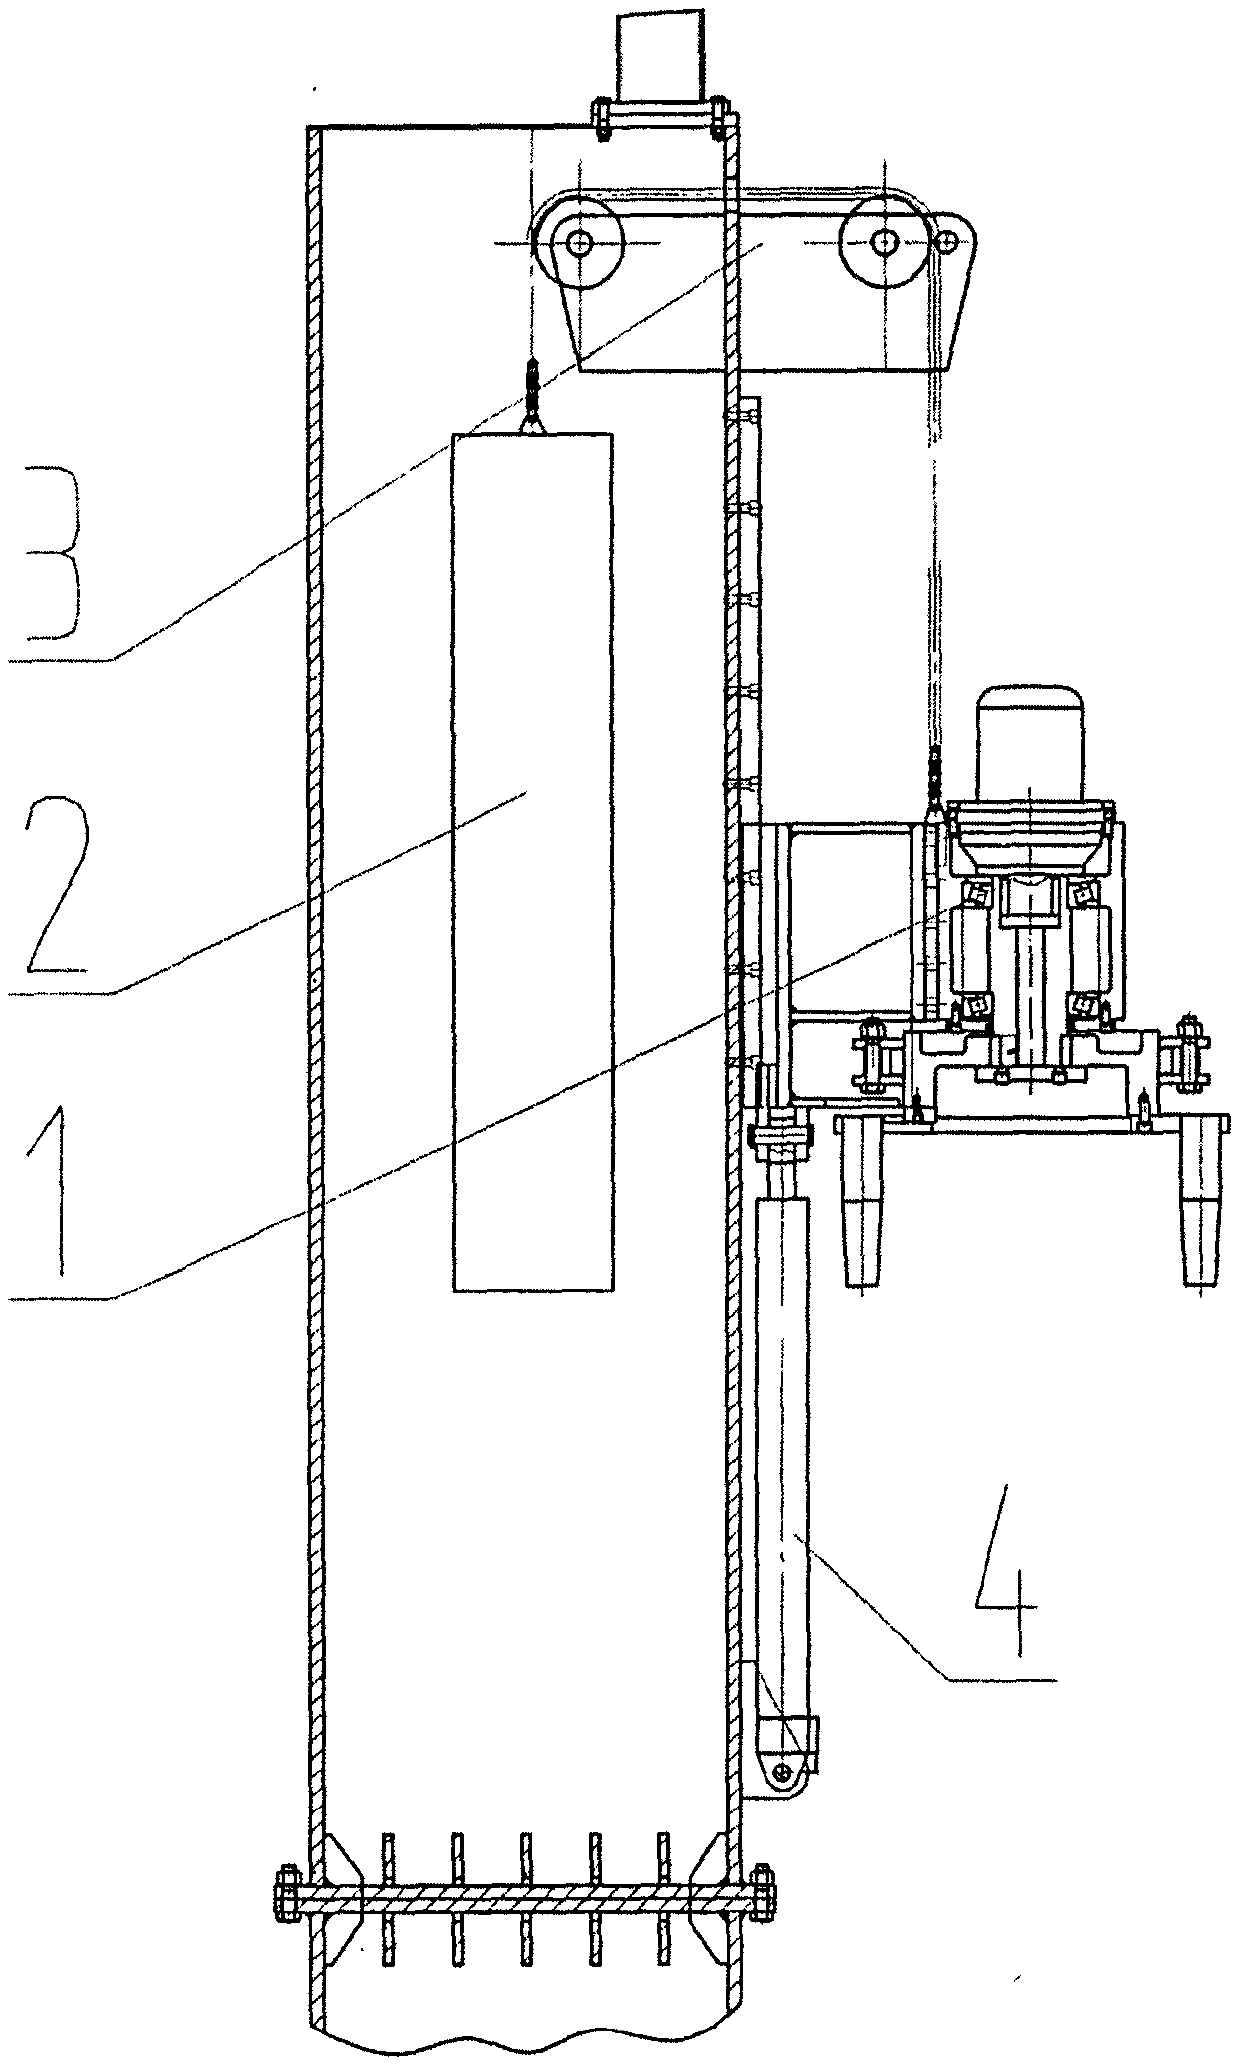 Novel upright assembling and disassembling device for upright columns of hydraulic support